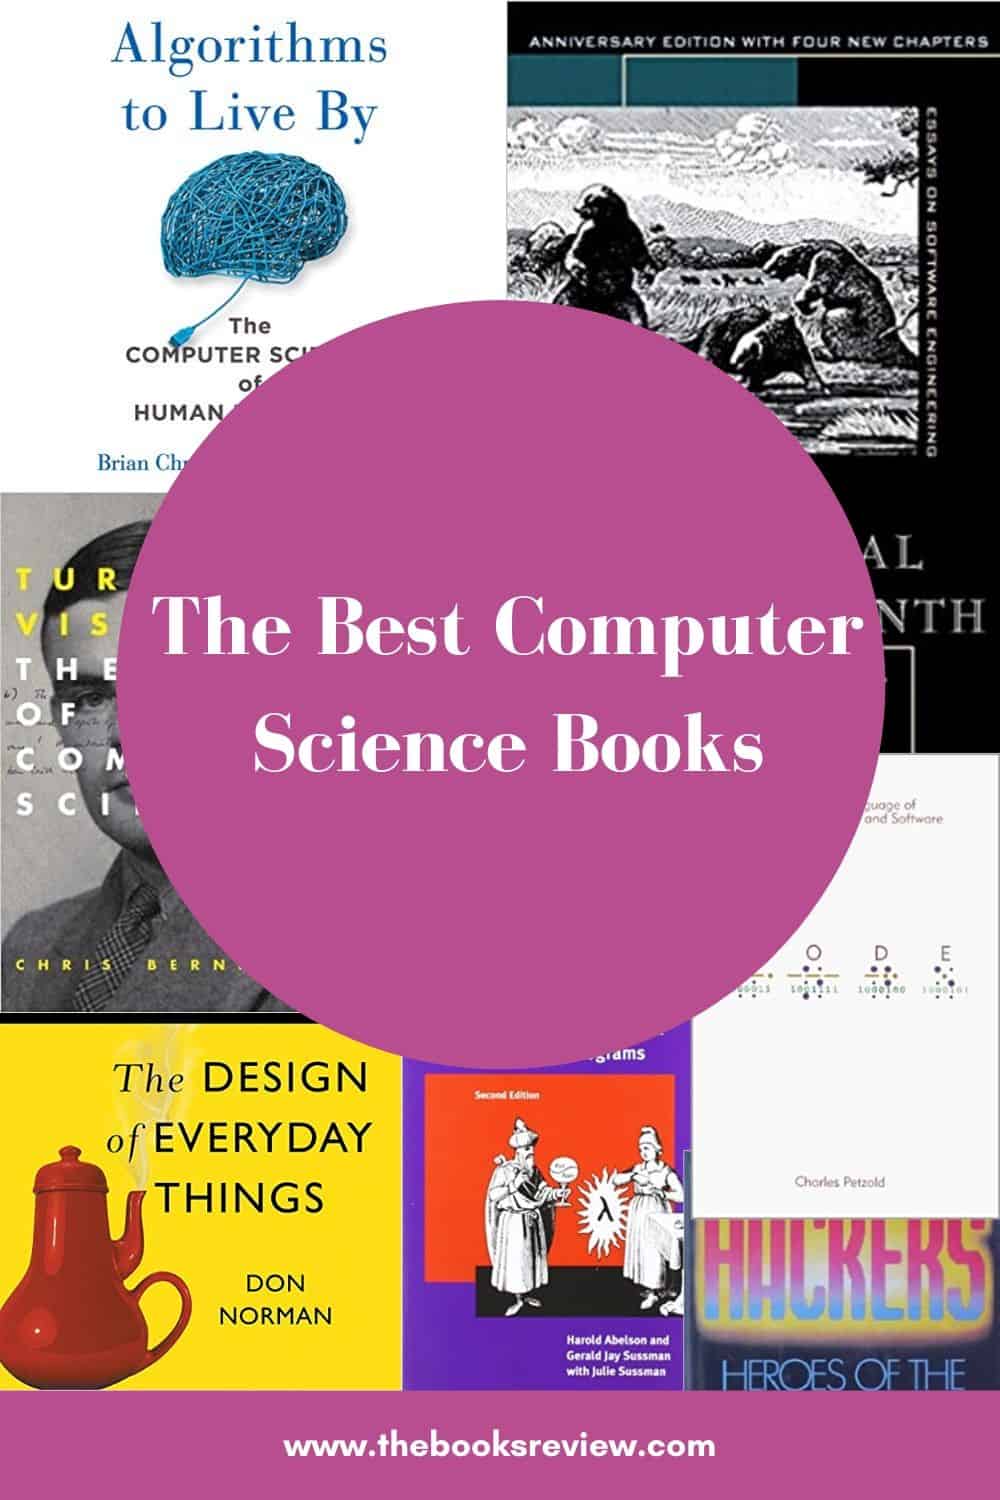 The Best Computer Science Books for 2020 | The Books Review